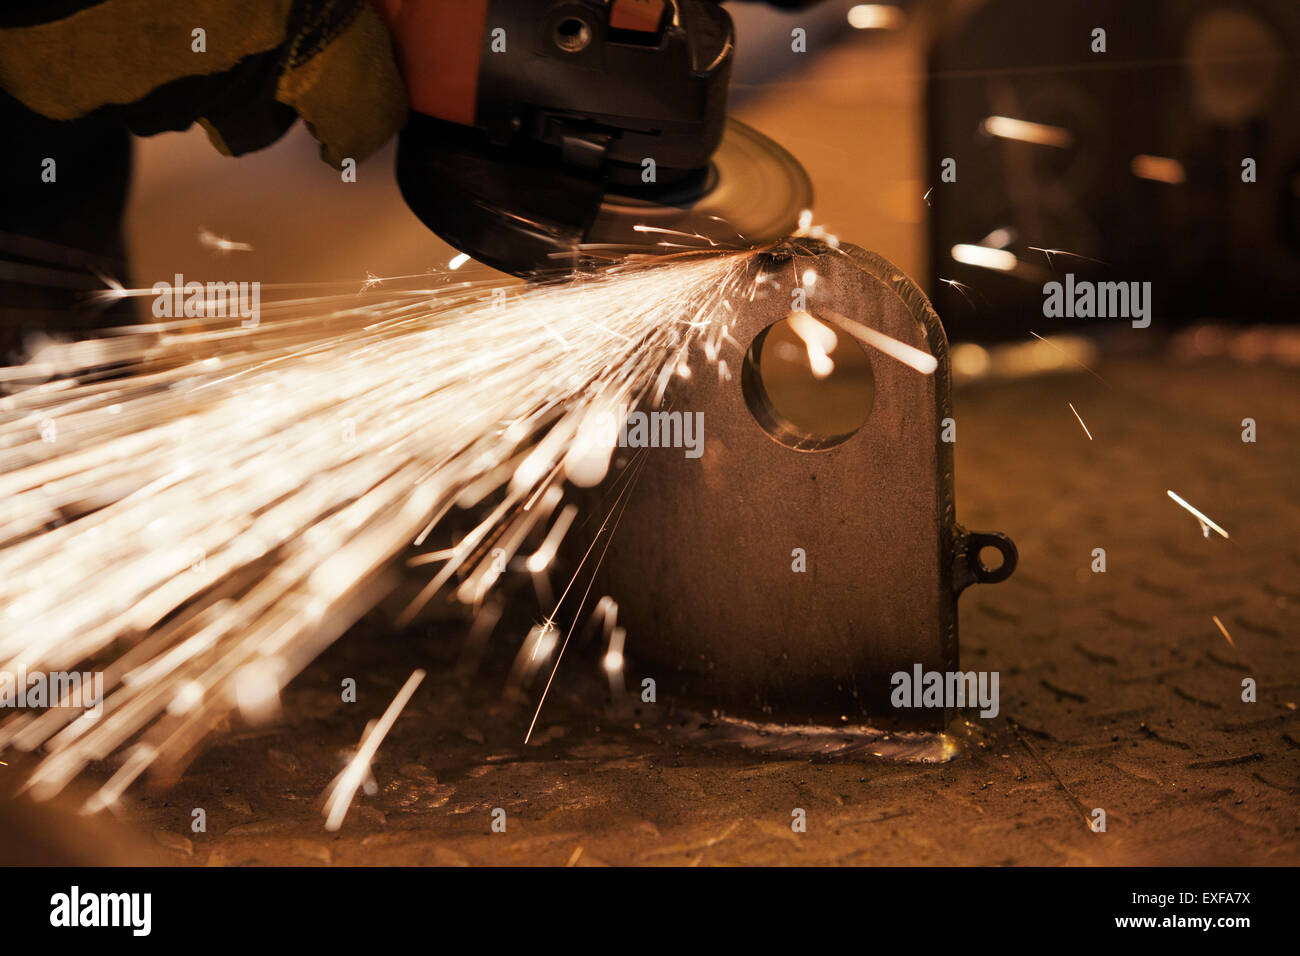 Sparks from worker using grinder in factory Stock Photo